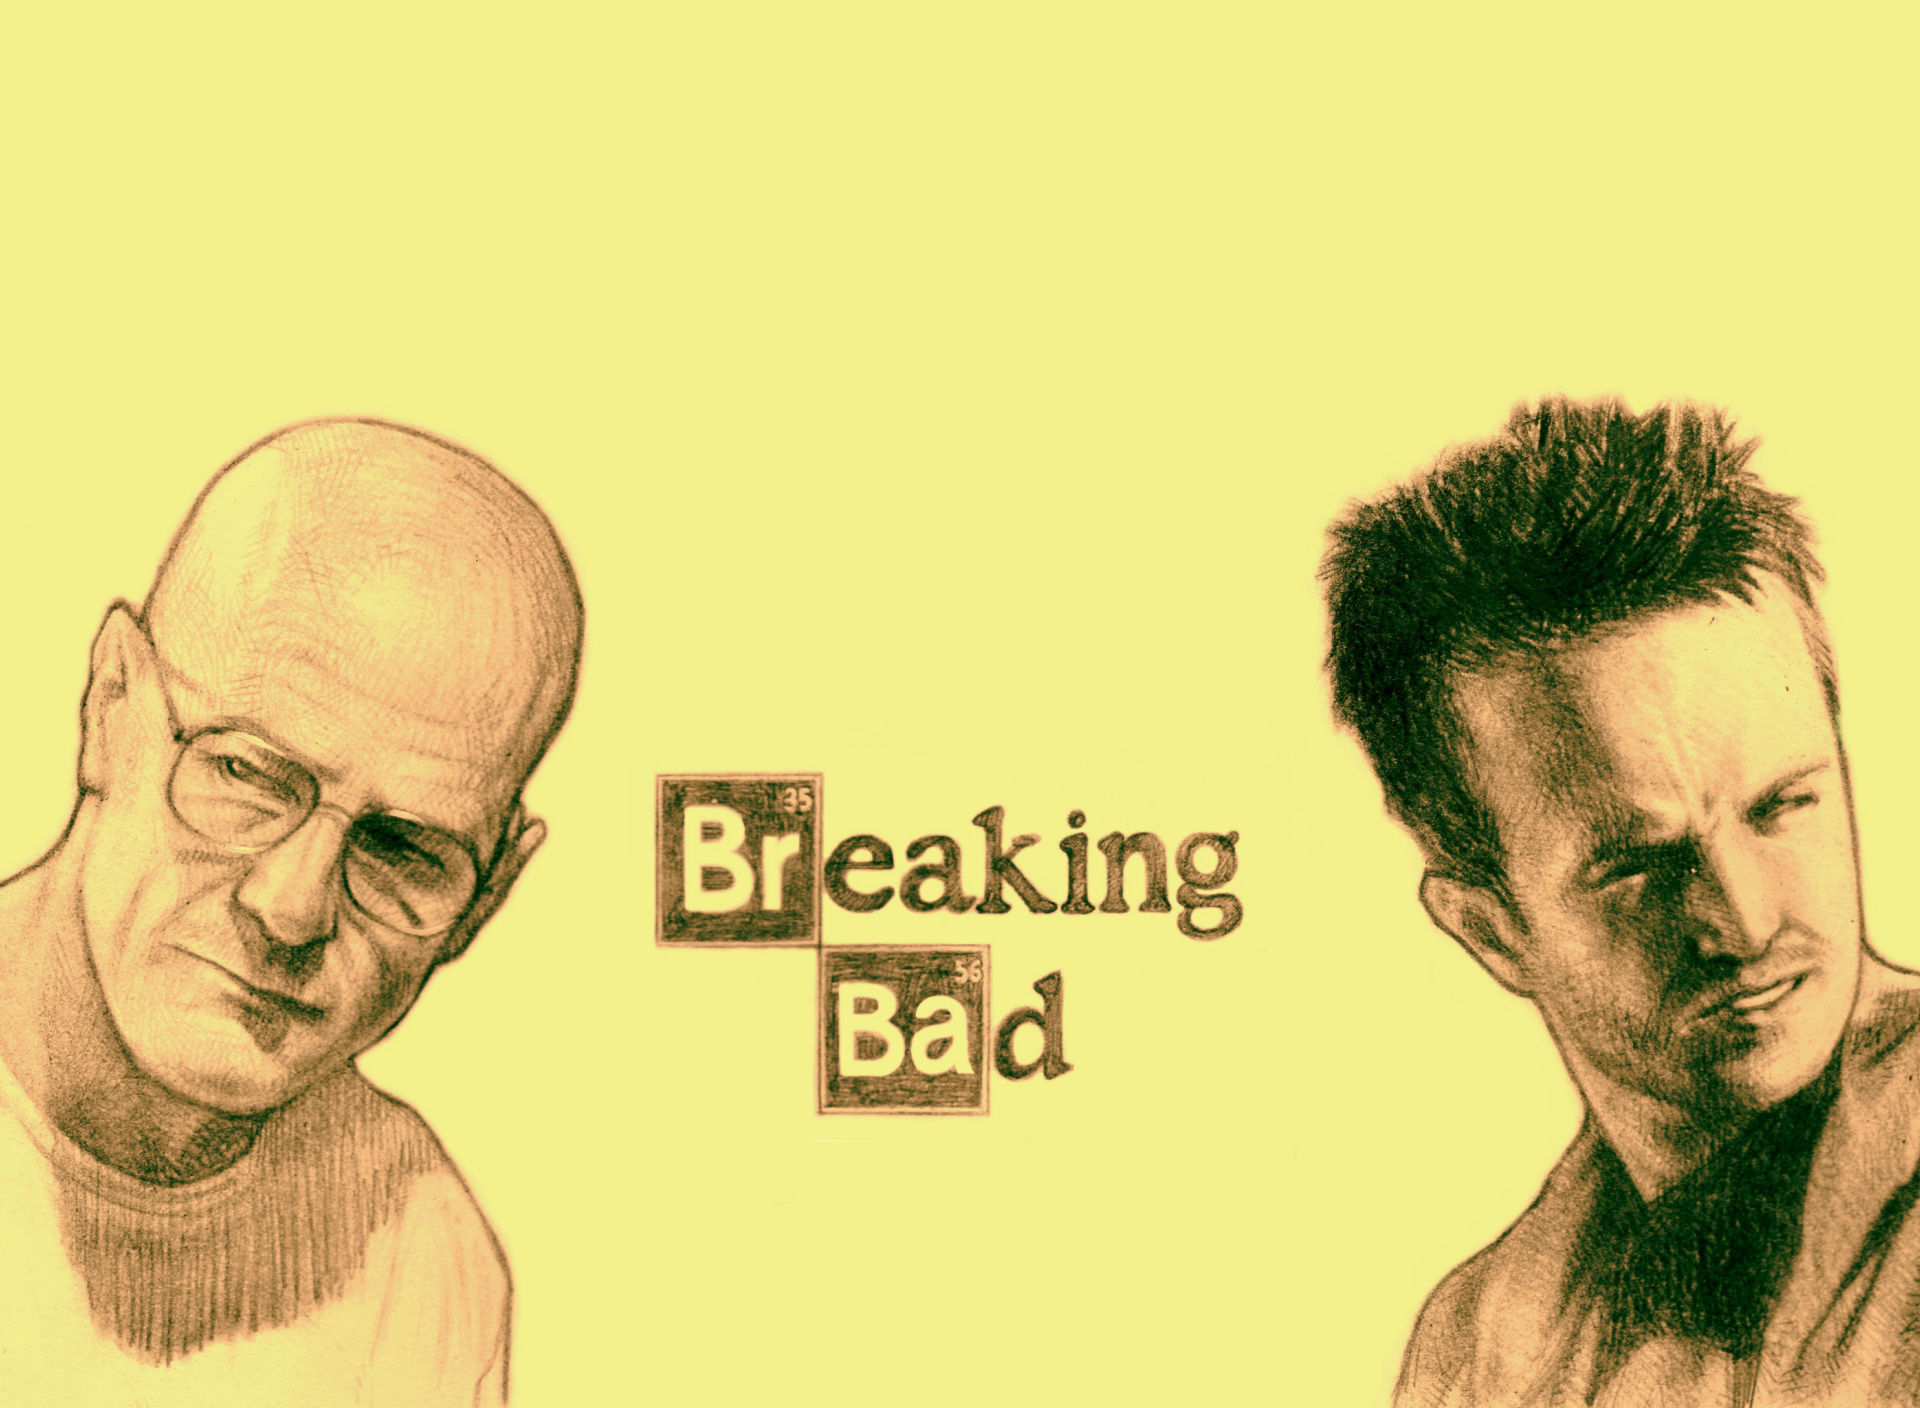 Walter White and Jesse Pinkman in Breaking Bad wallpaper 1920x1408